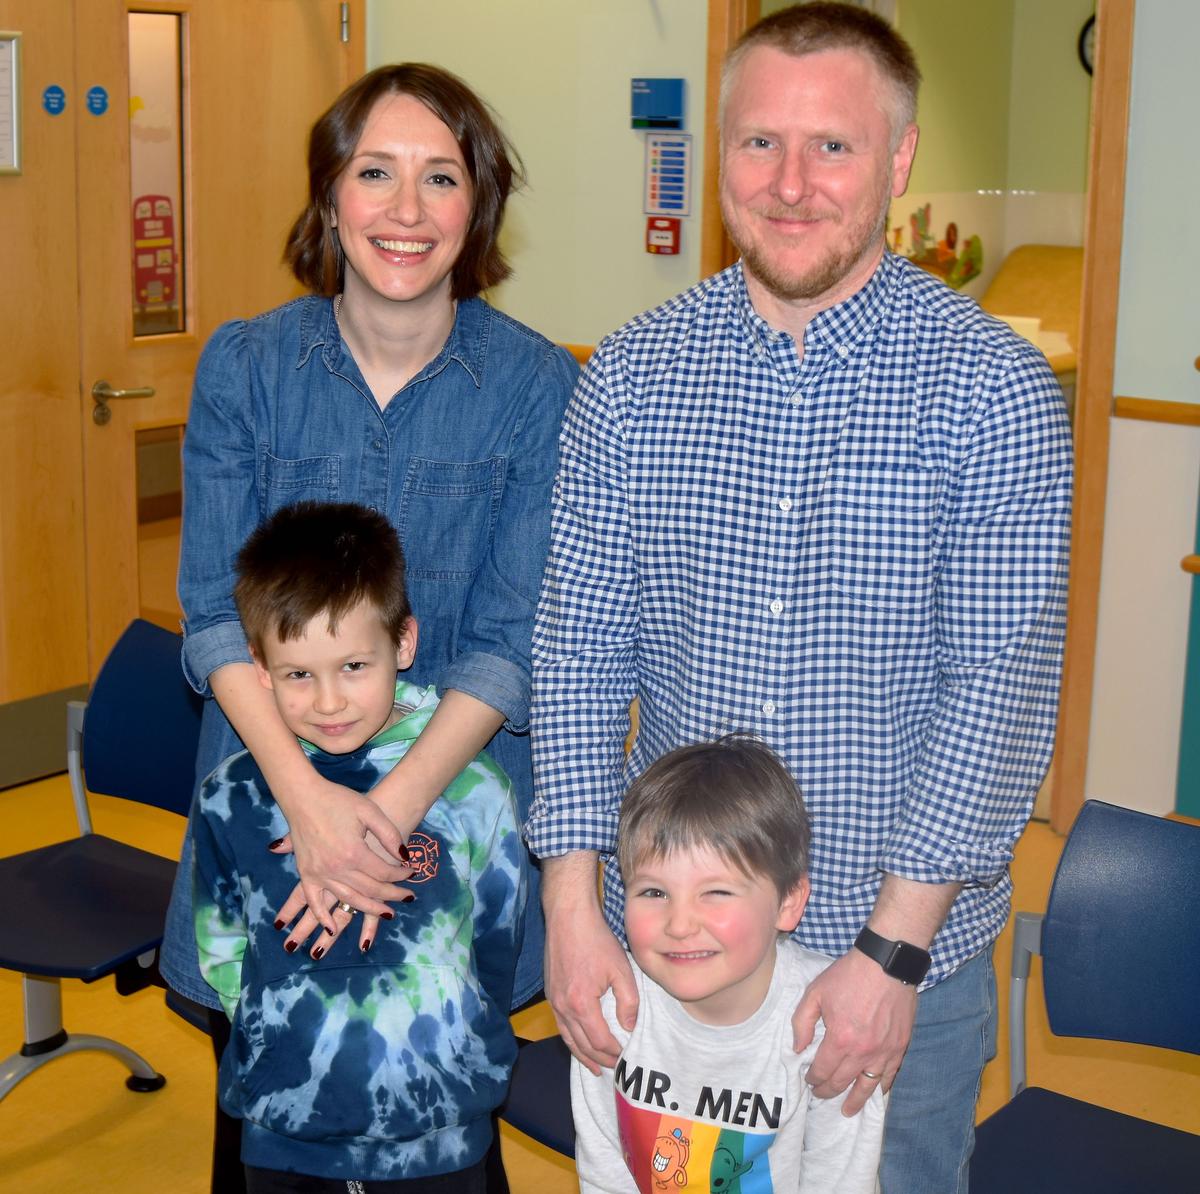 Vici Rigby with her husband, Jamie, and two sons, George and Jack. (Courtesy of <a href="https://www.worcsacute.nhs.uk/">Worcestershire Acute Hospitals NHS Trust</a>)